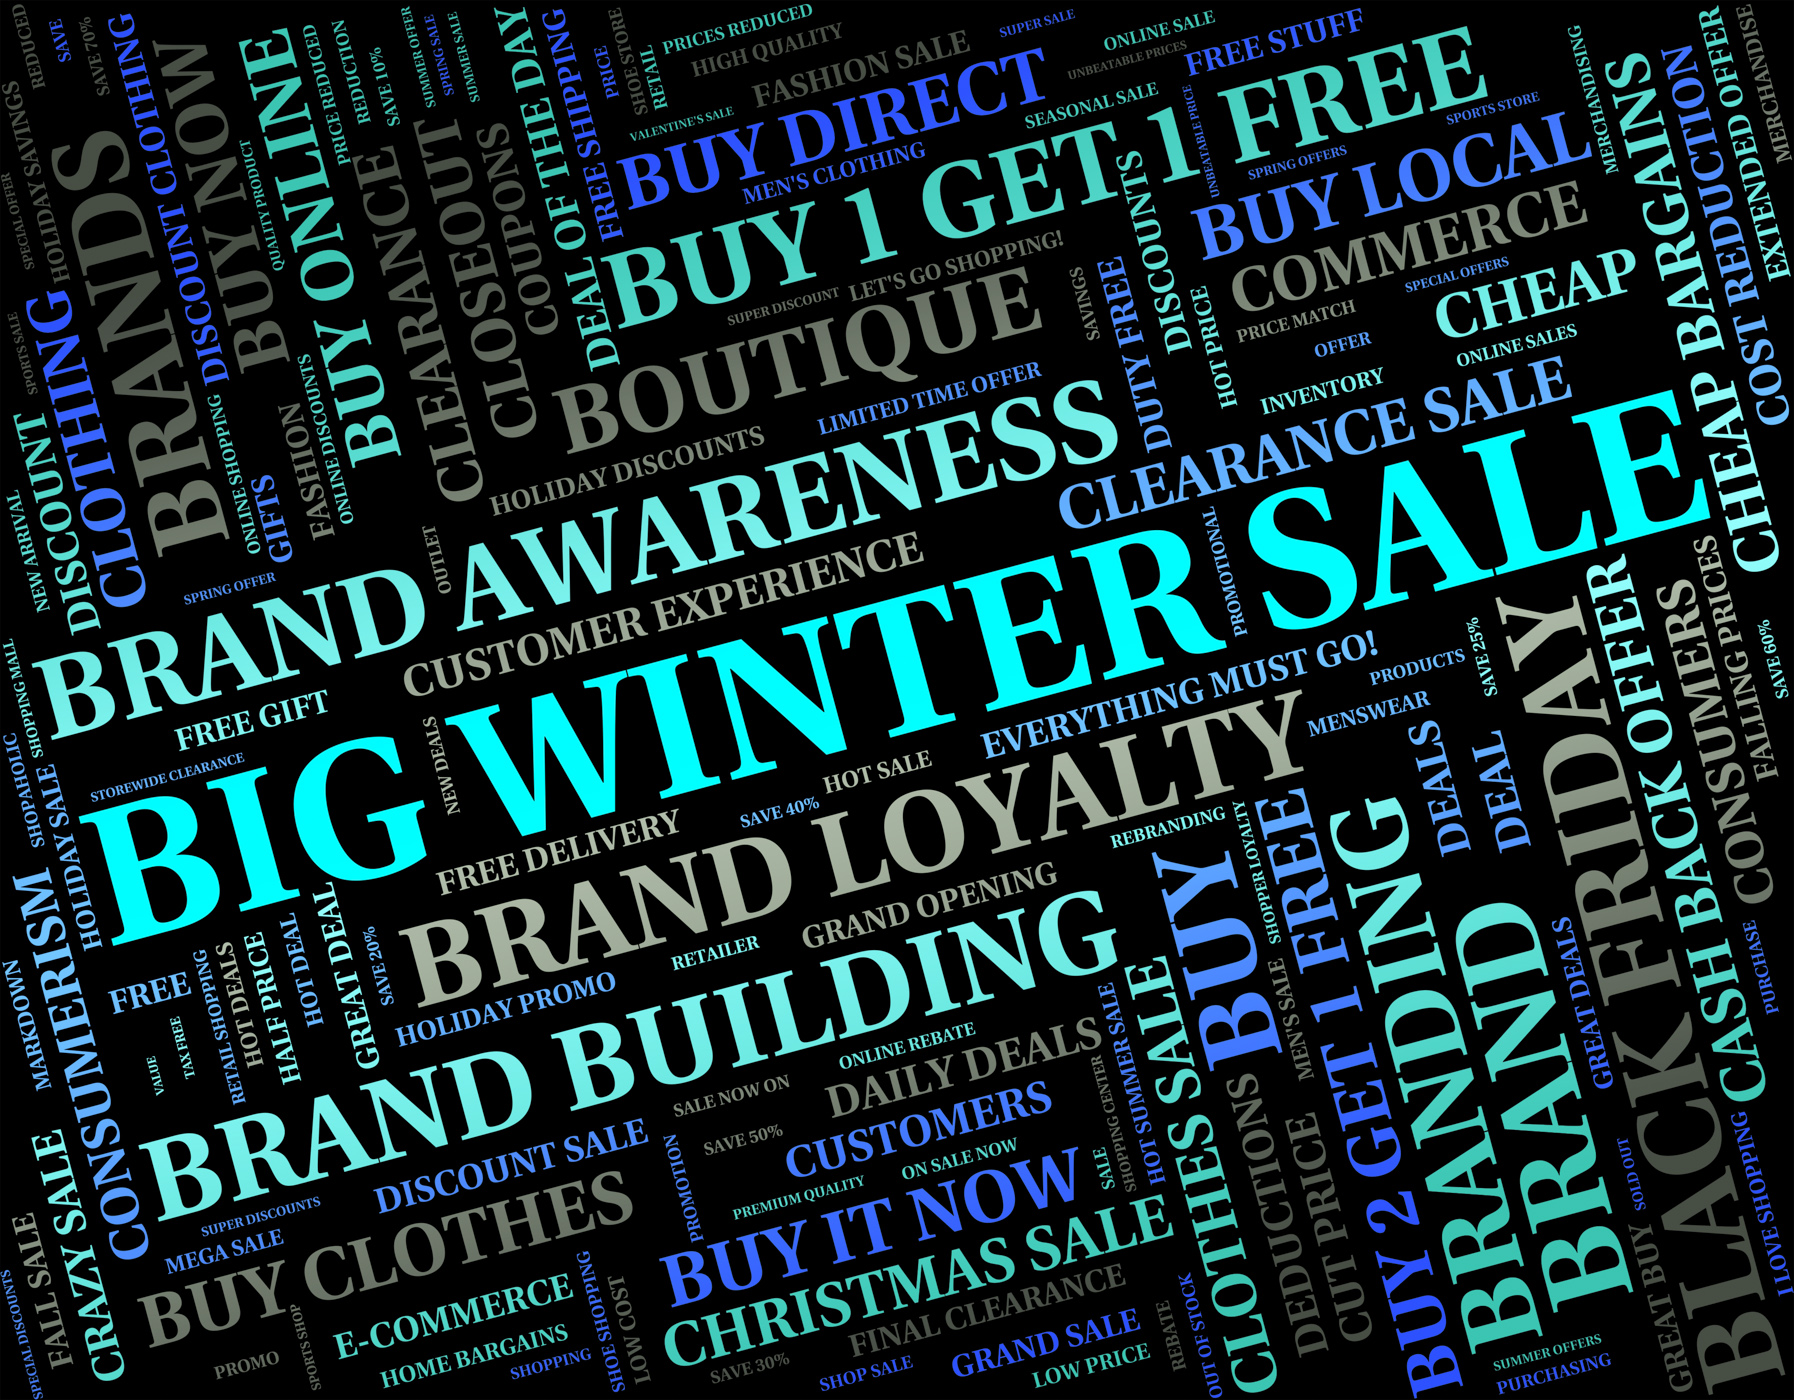 Big winter sale shows retail season and large photo